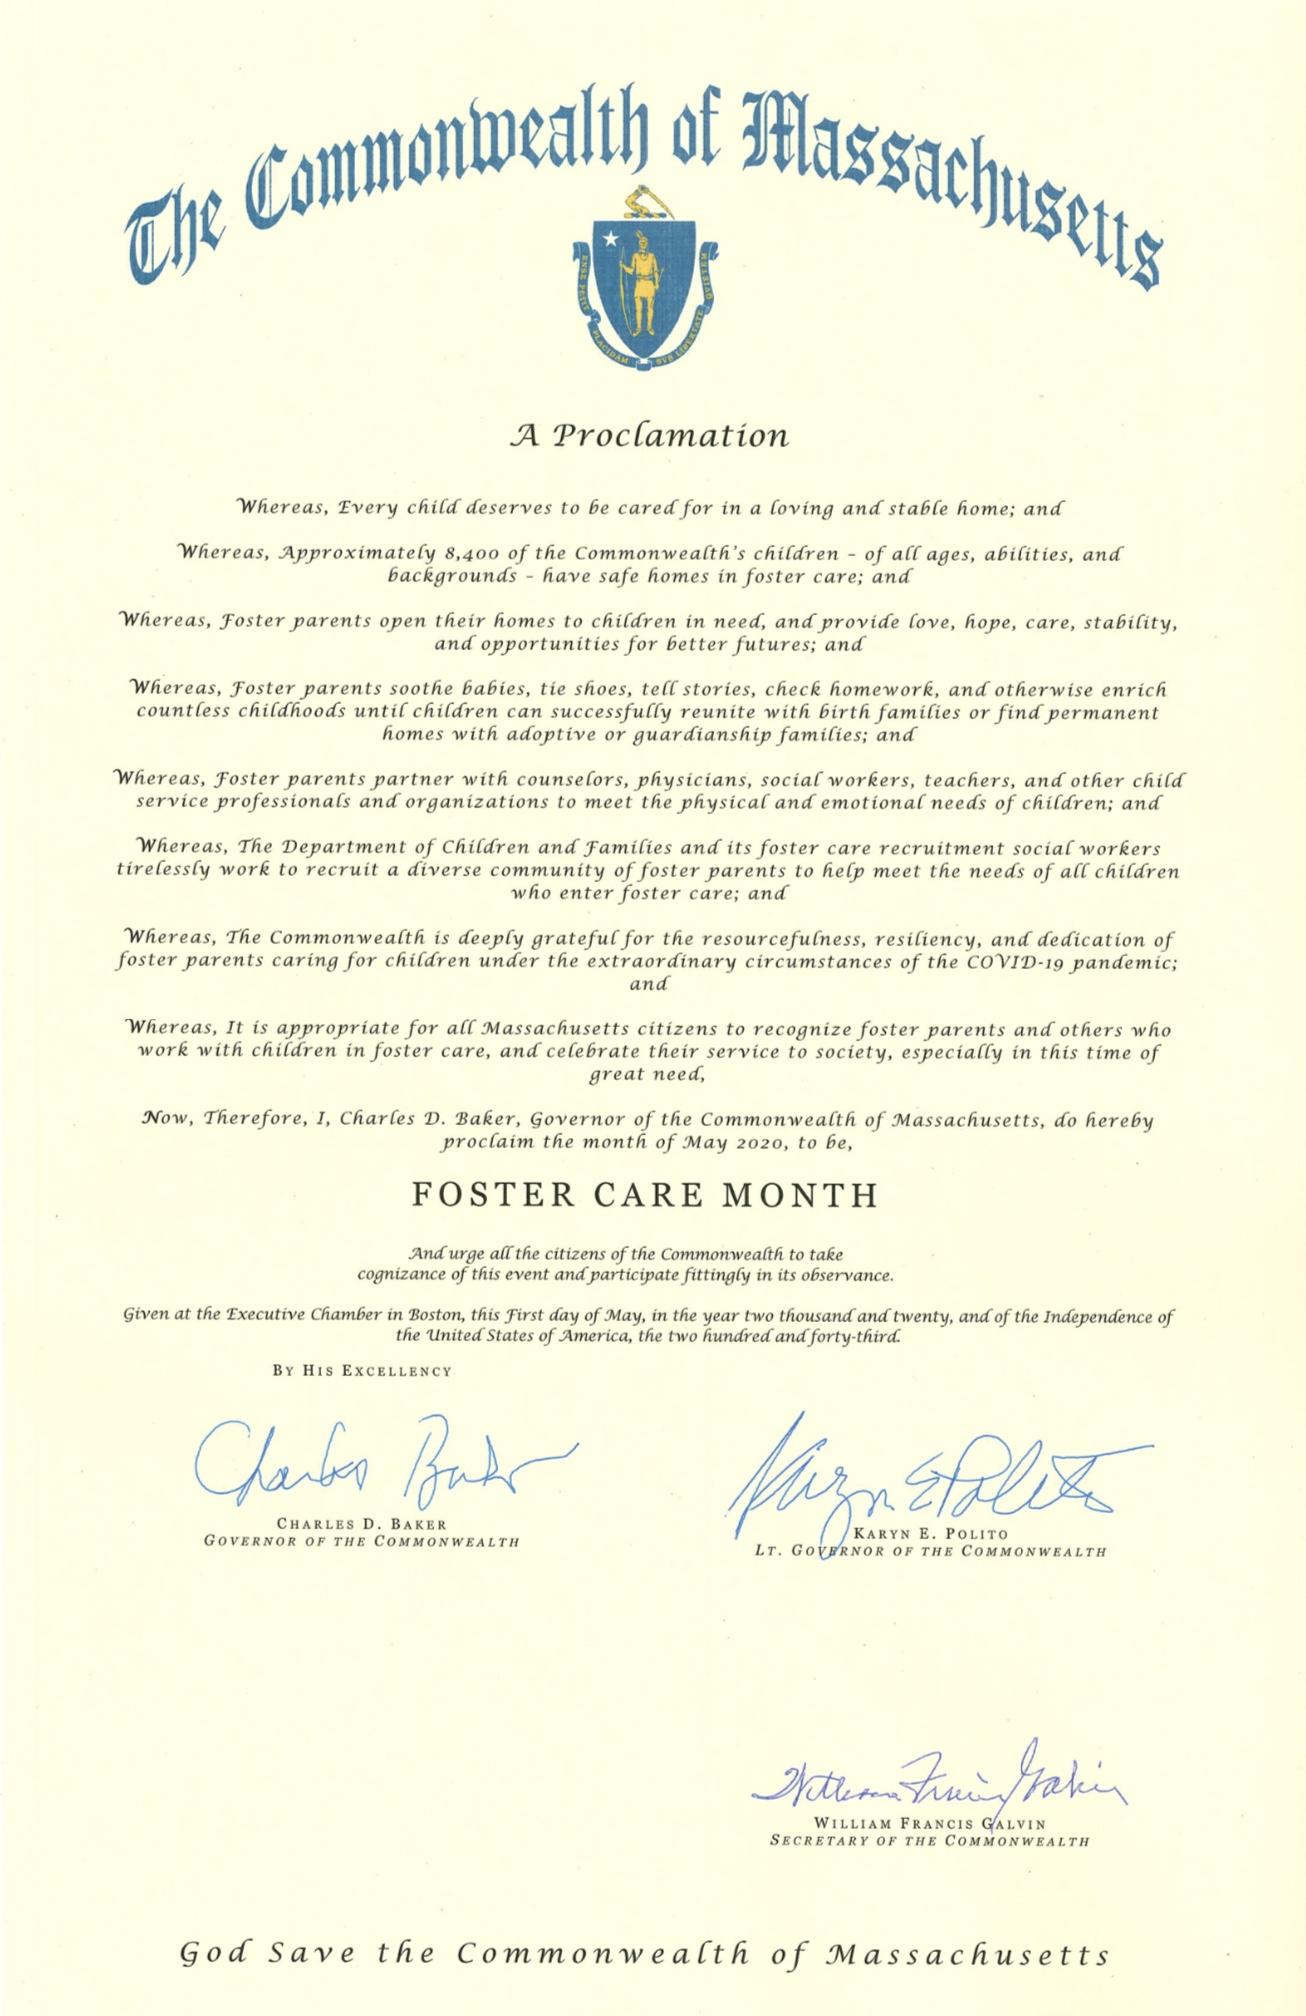 Proclamation recognizing Foster Care Month 2020 in the Commonwealth